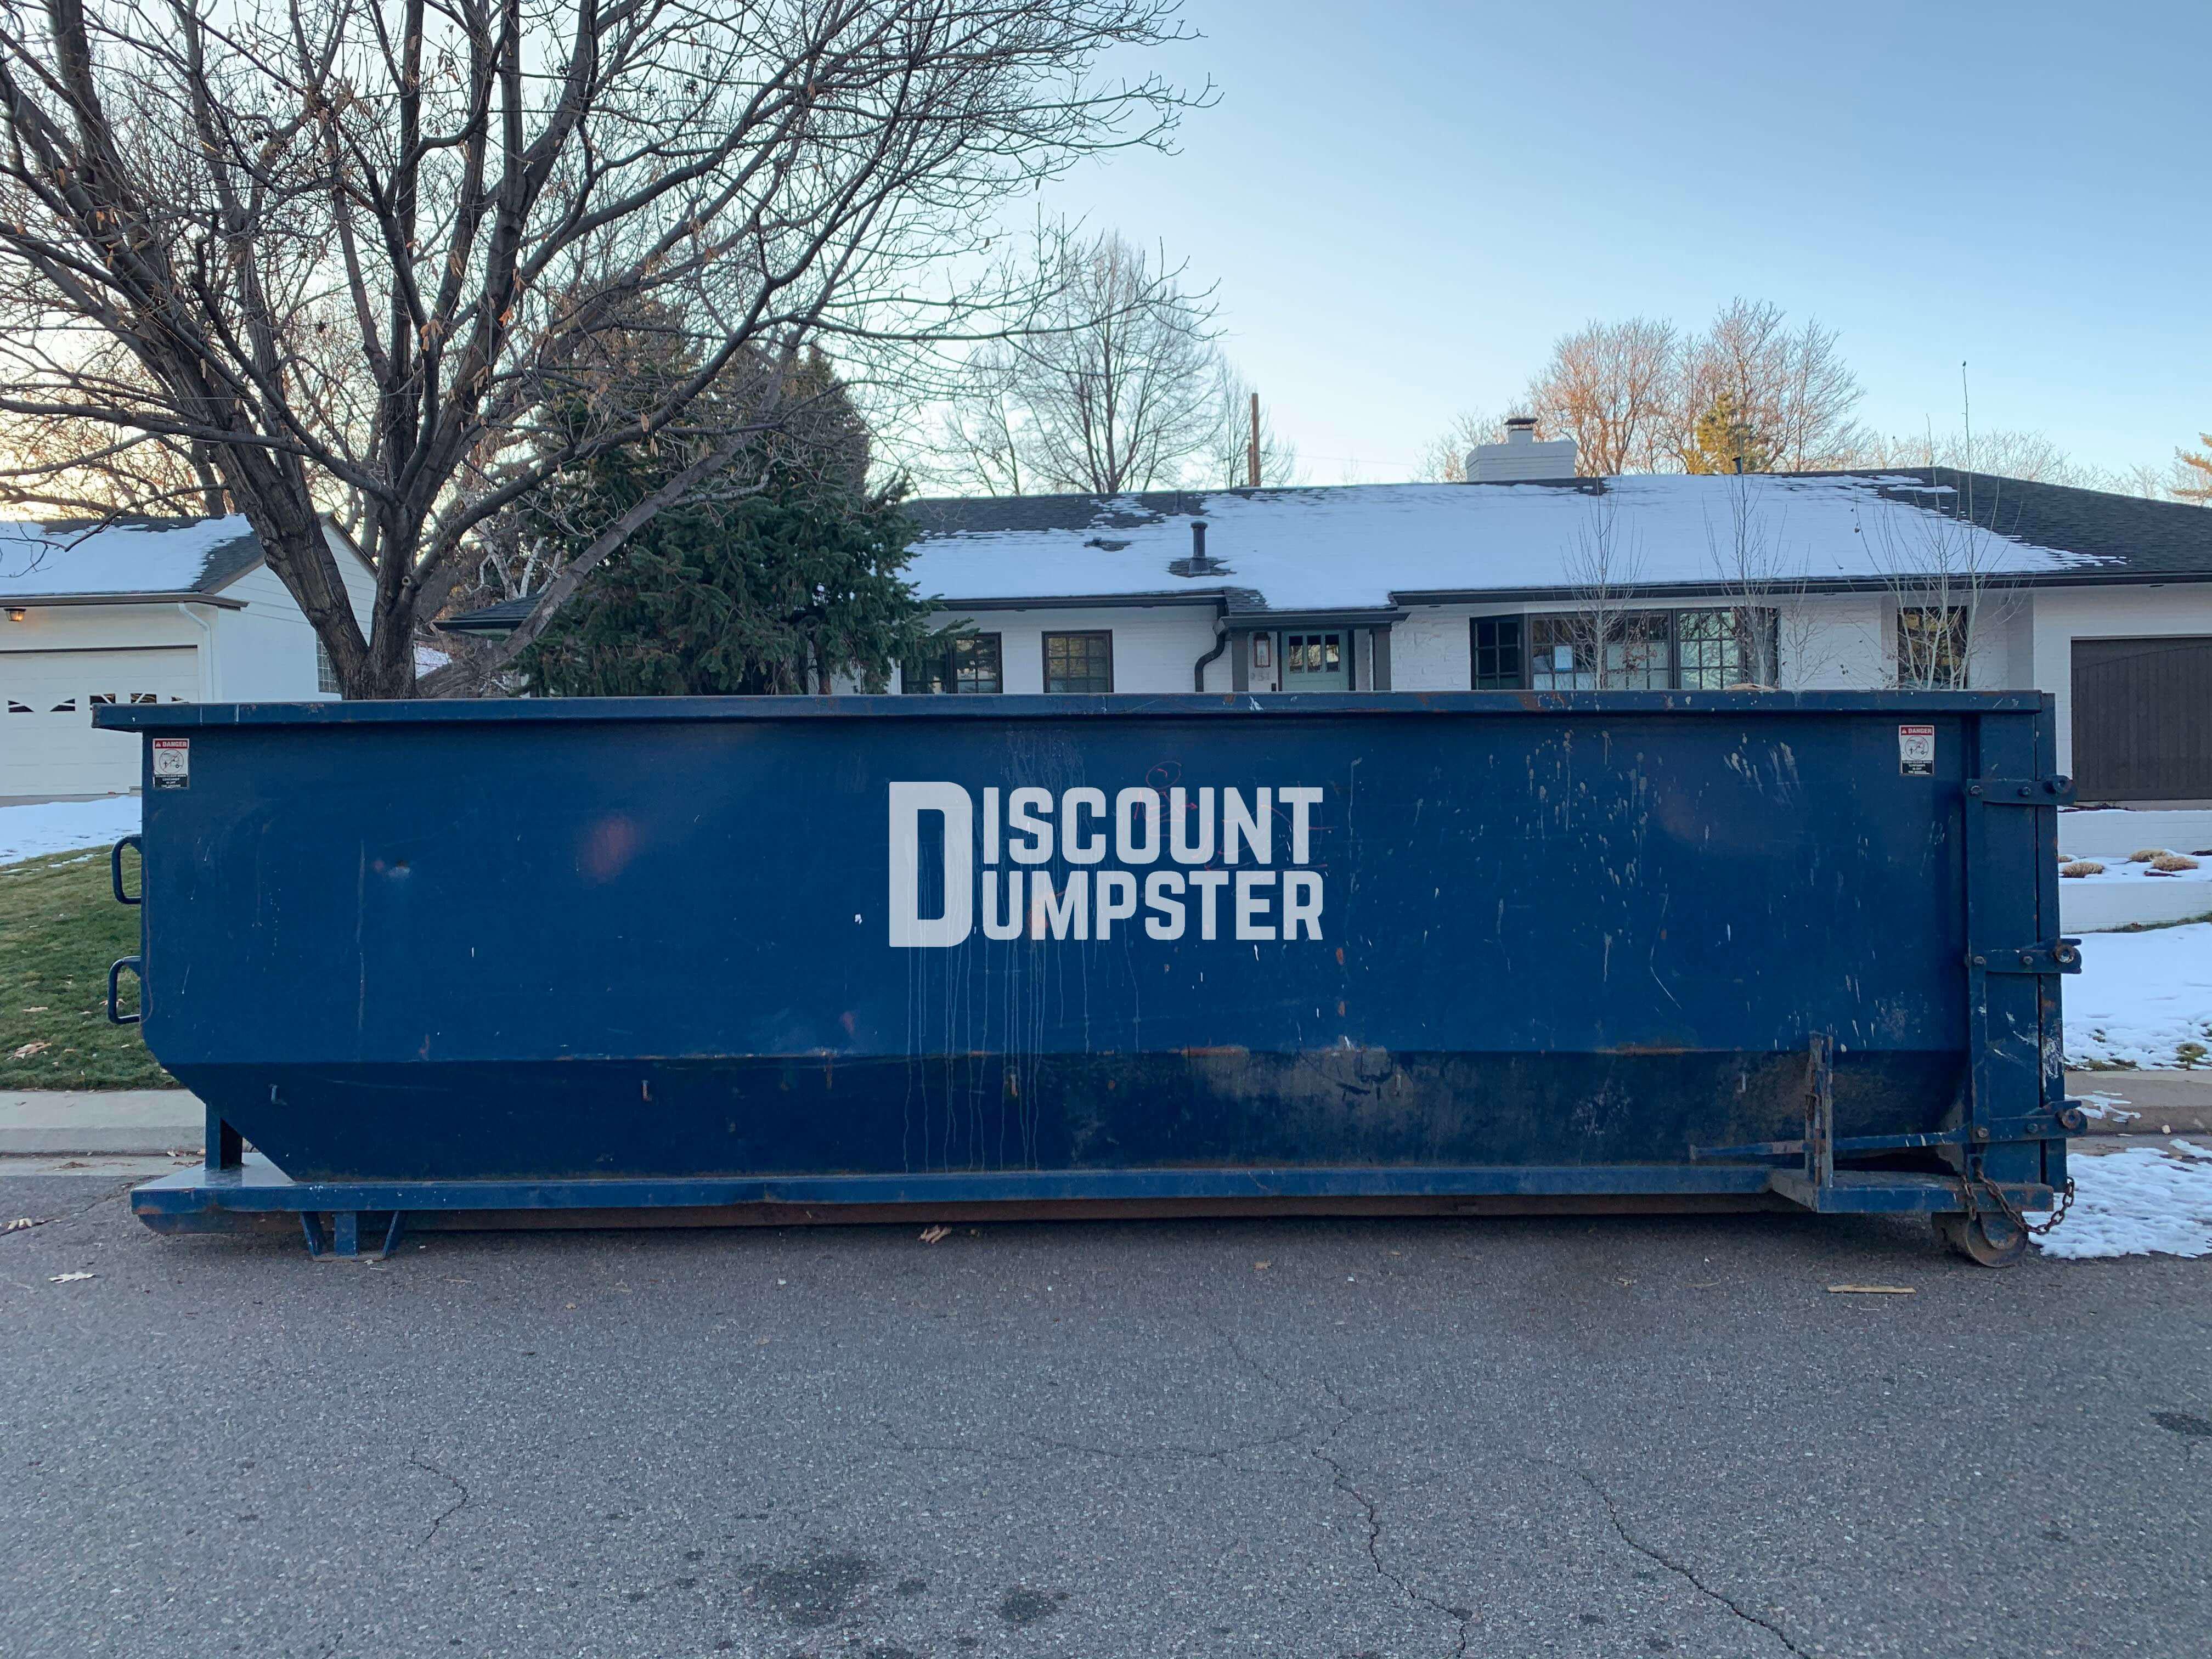 Discount dumpster can take care of home renovation waste removal in Denver co